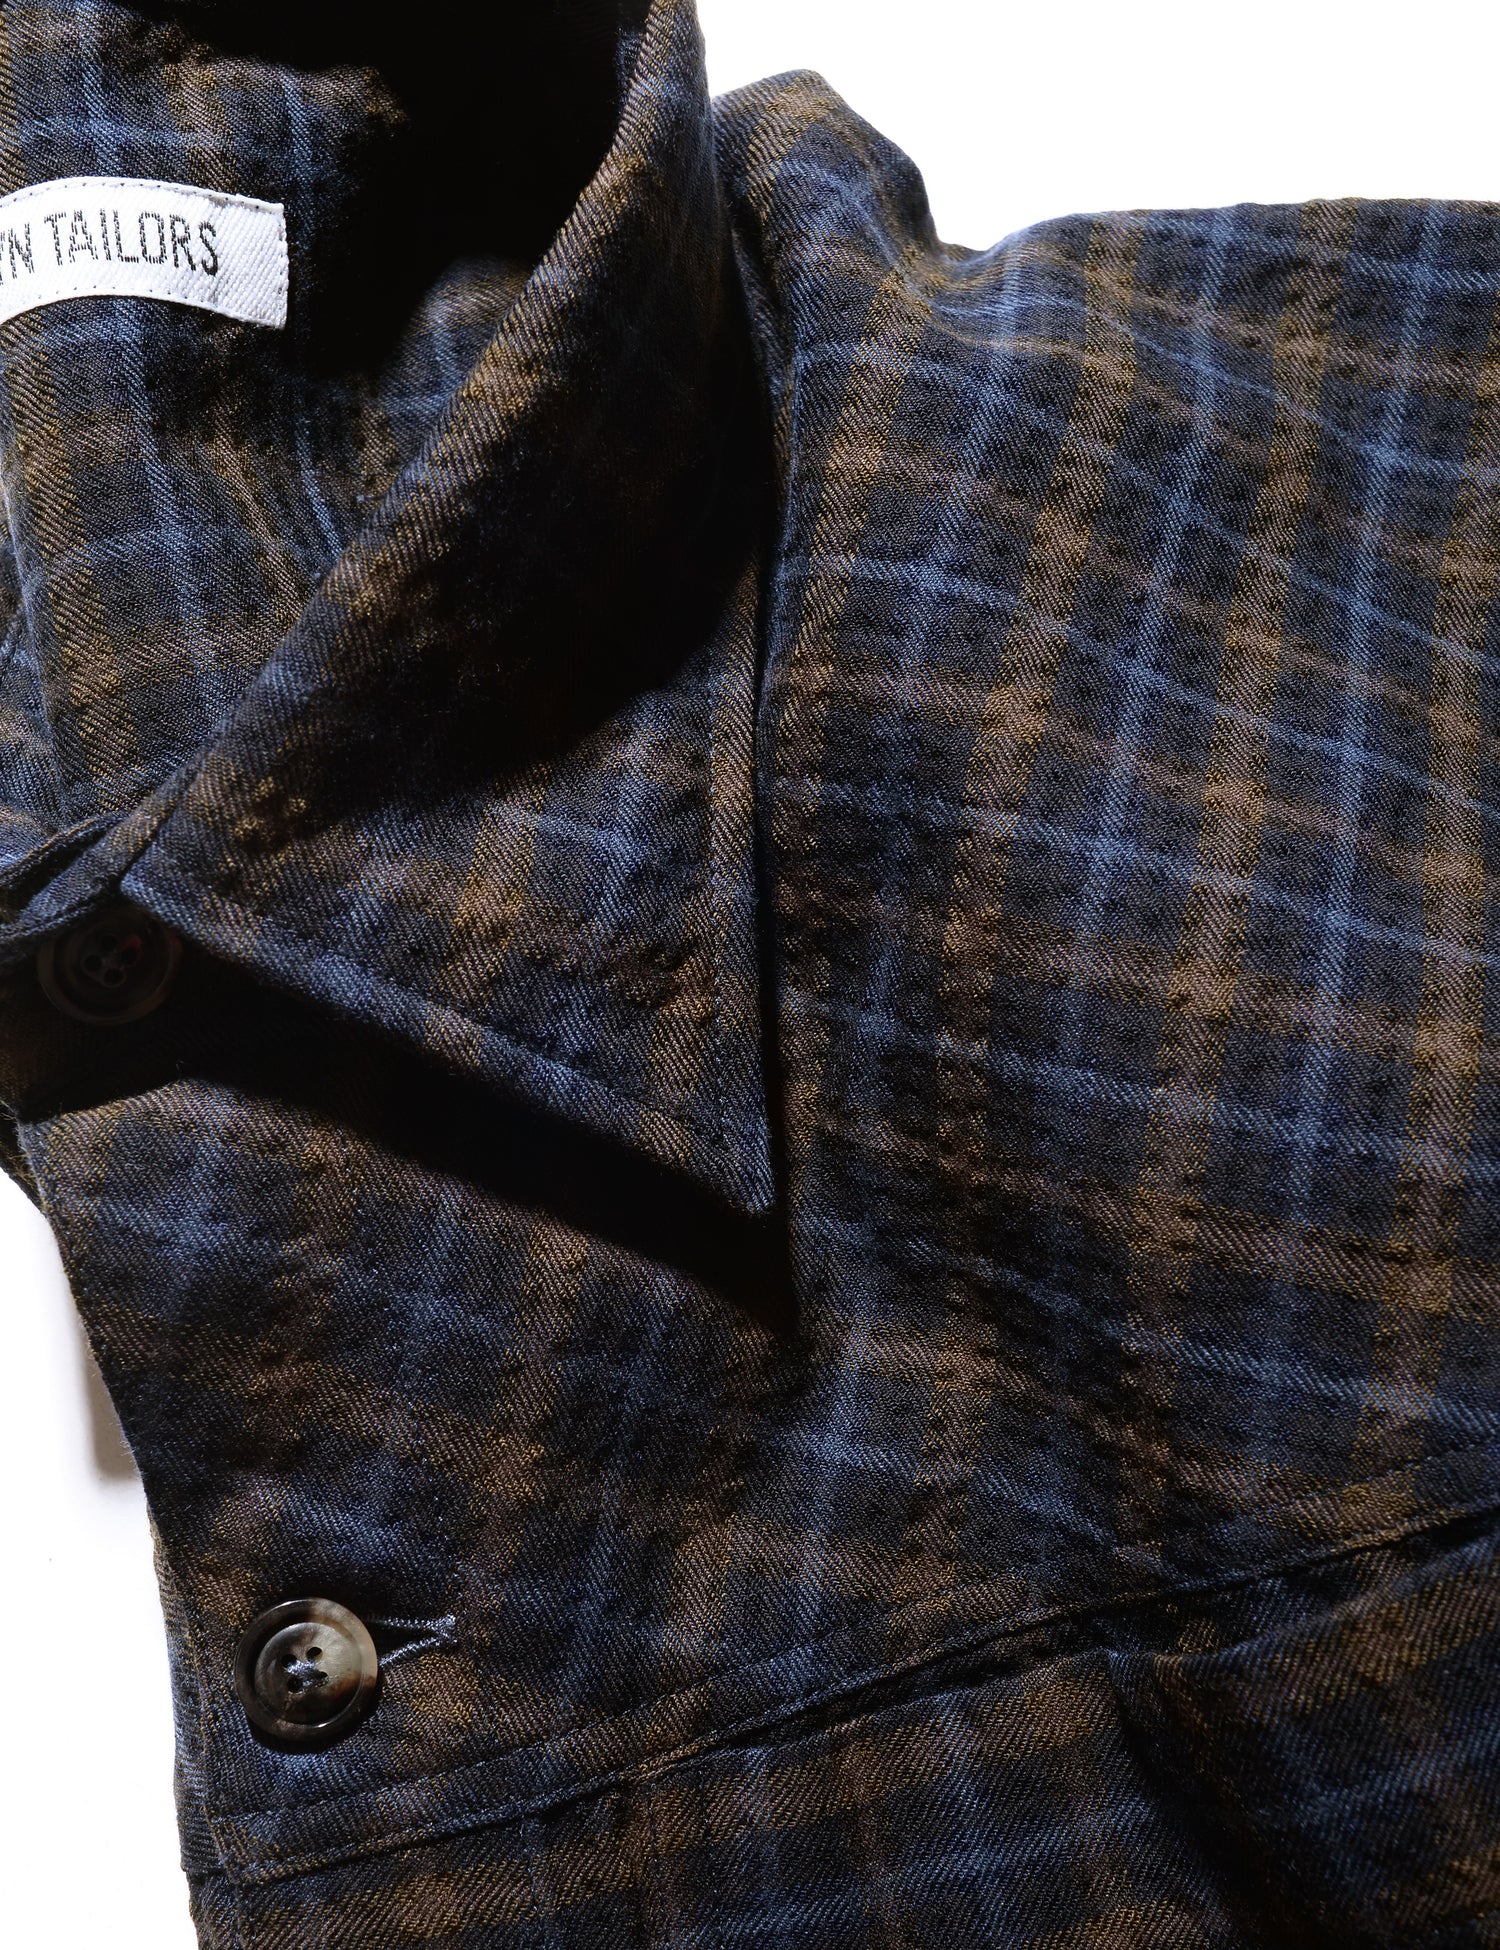 Detail of BKT15 Shirt Jacket in Crinkled Wool & Cotton - Autumn Check showing collar, button, and fabric pattern and texture